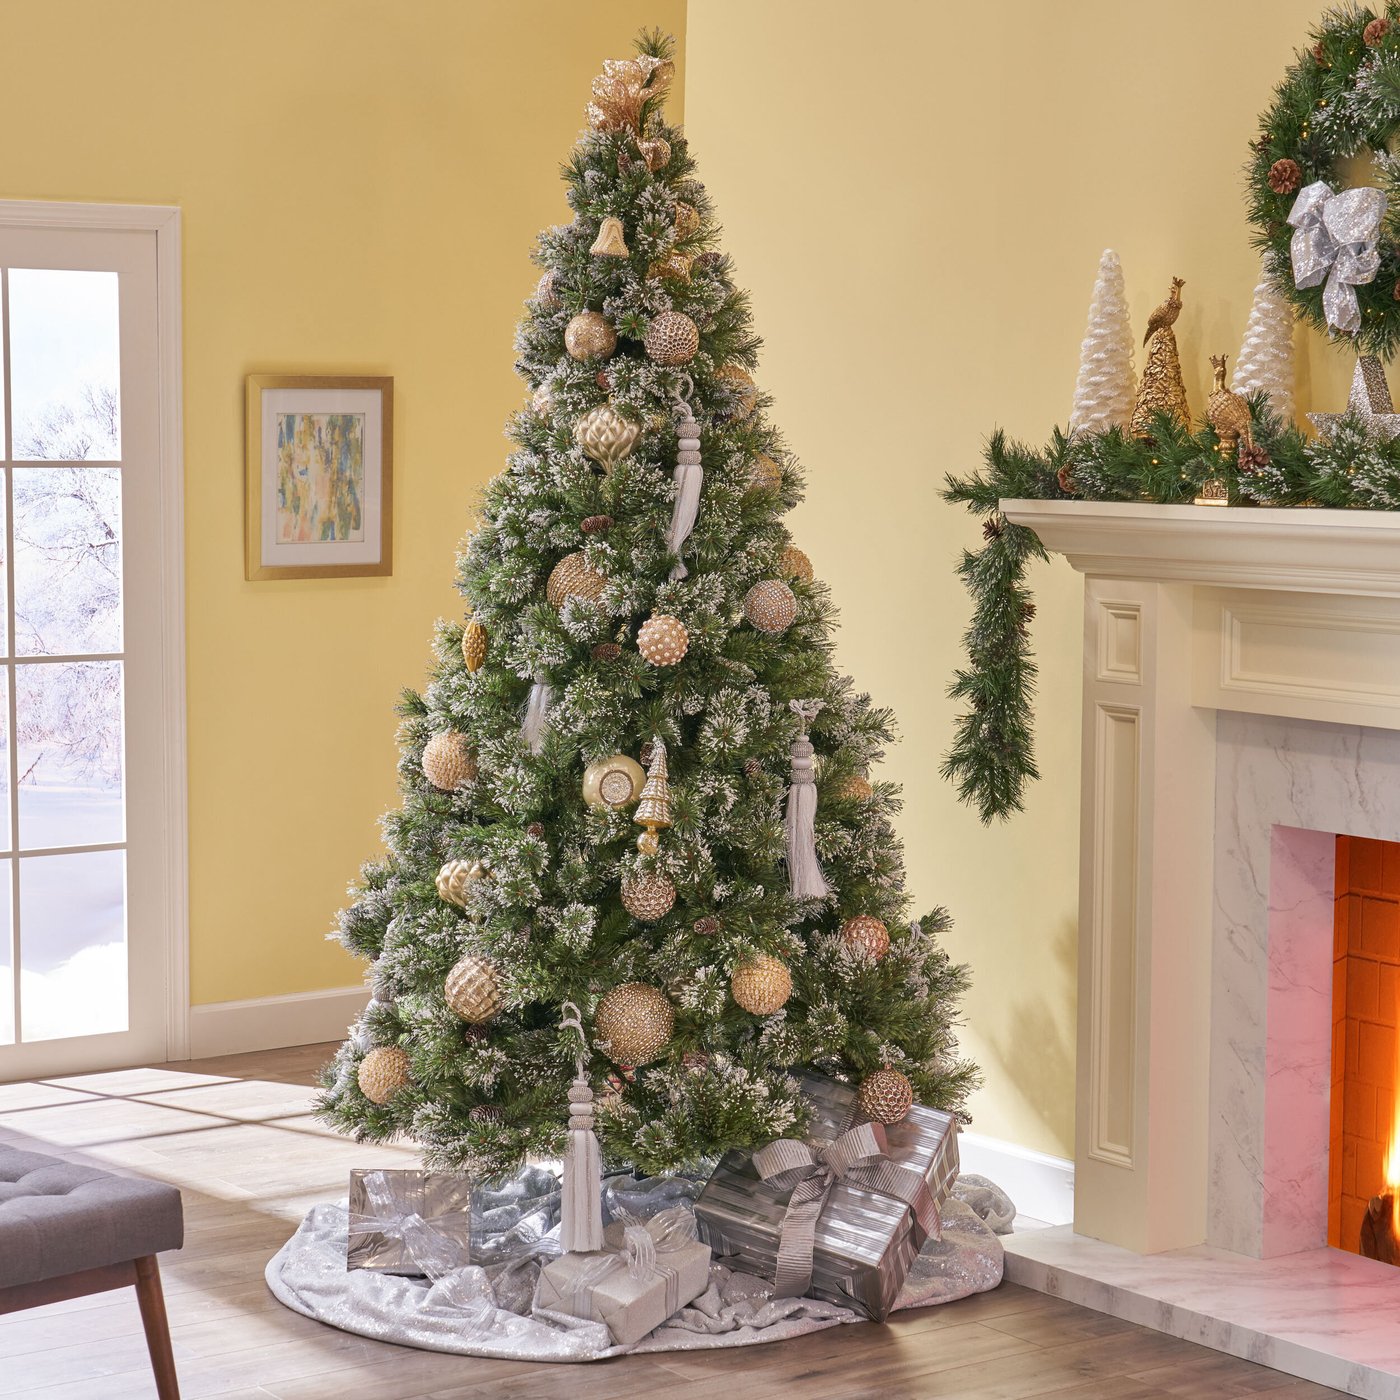 4 Expert Tips To Choose An Artificial Christmas Tree - VisualHunt